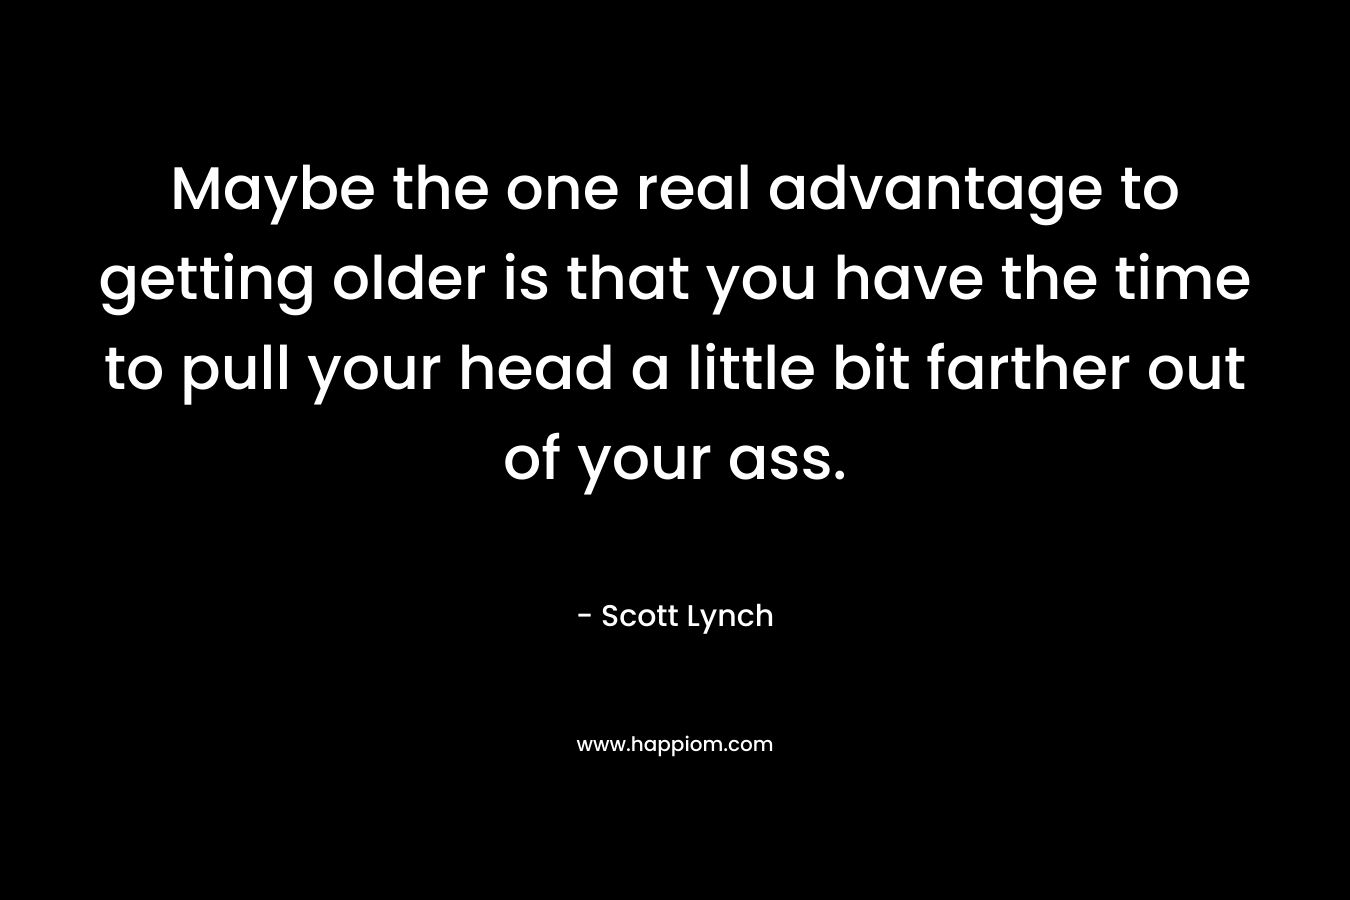 Maybe the one real advantage to getting older is that you have the time to pull your head a little bit farther out of your ass.